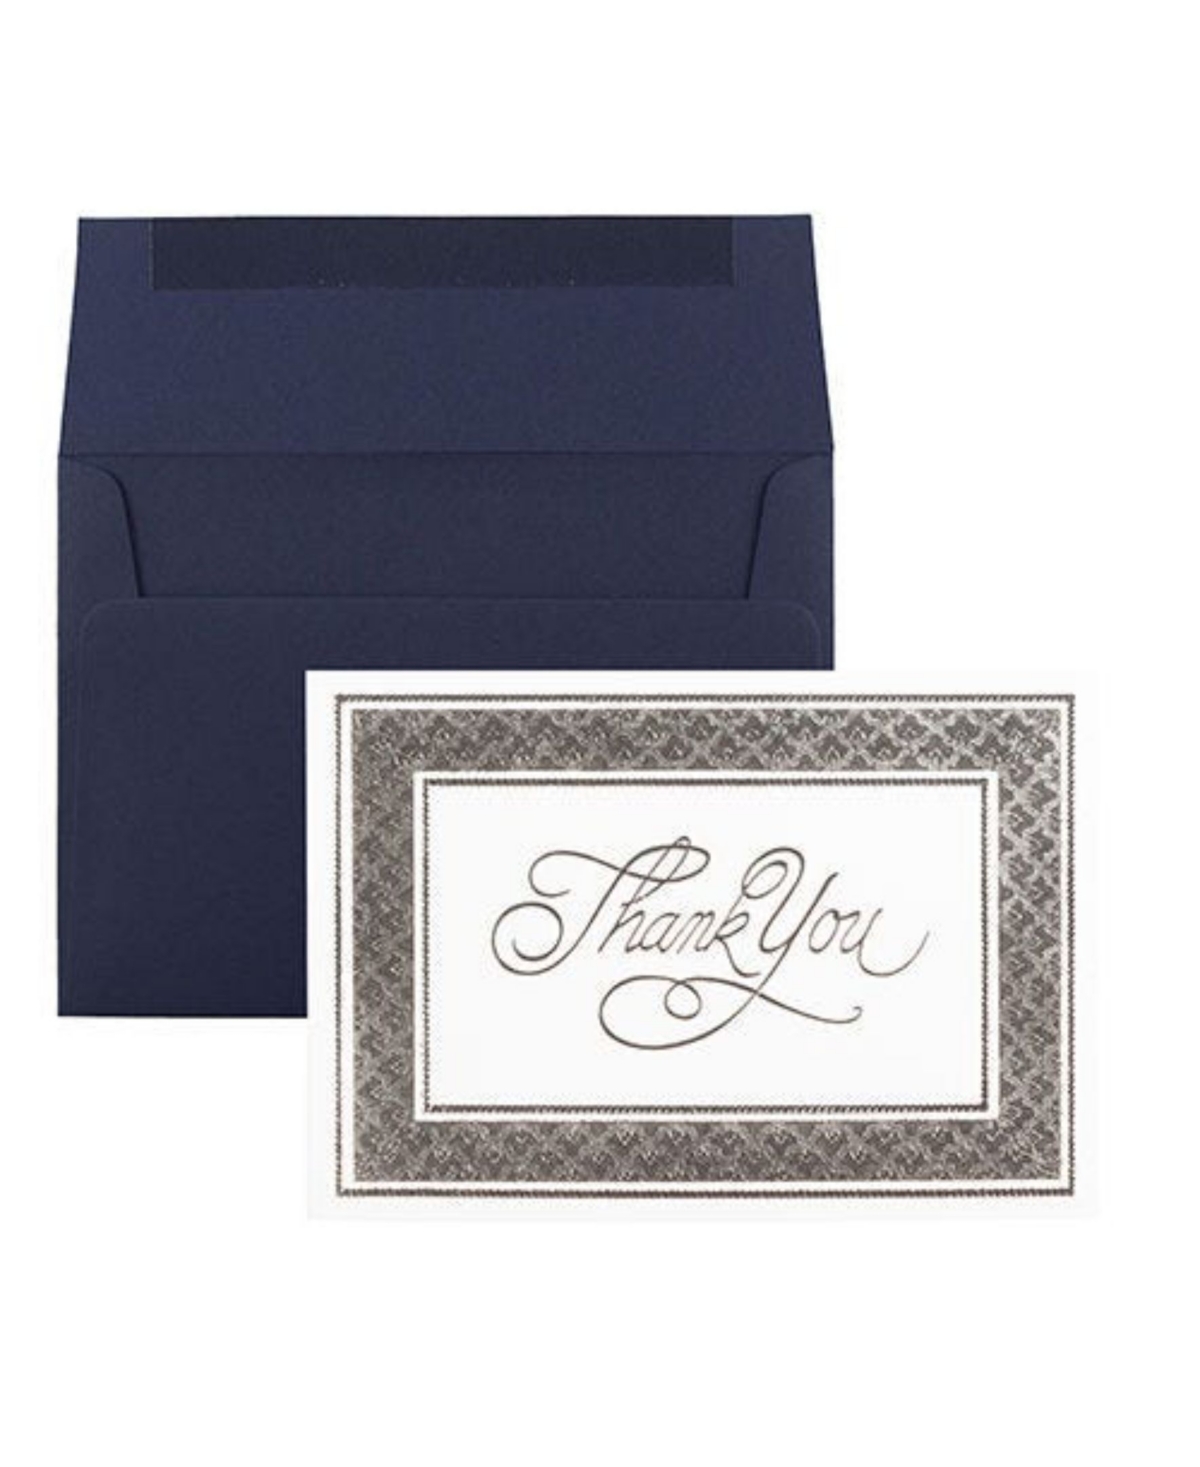 Thank You Card Sets- 25 Cards and Envelopes - Silver Border Cards with Navy Envelopes